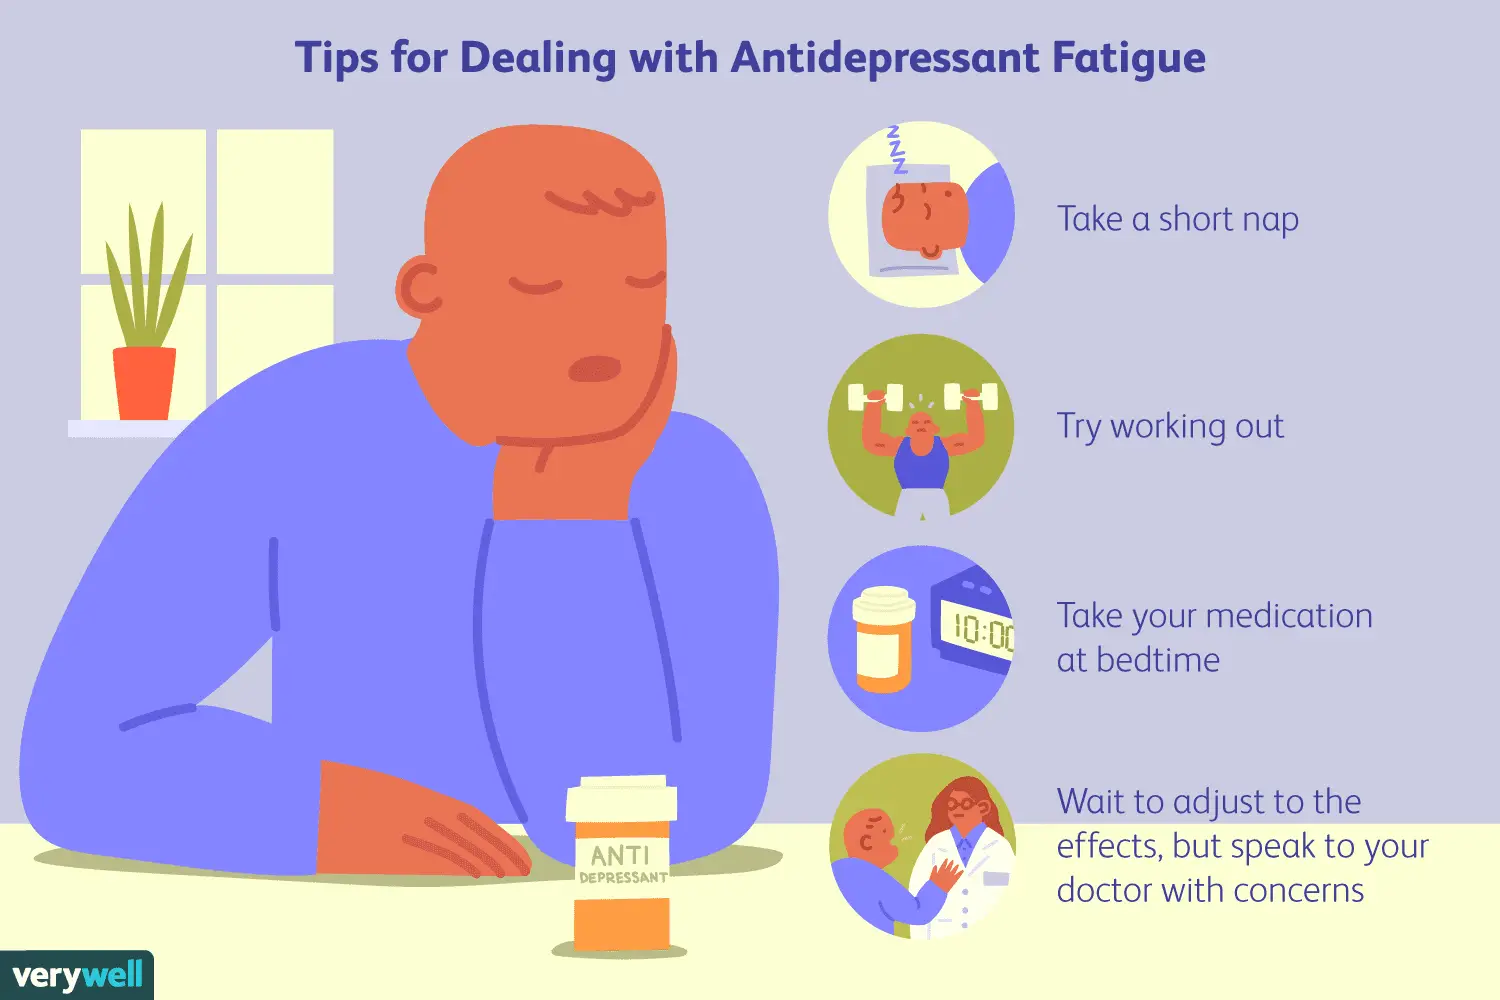 Coping With Fatigue Caused by an Antidepressant